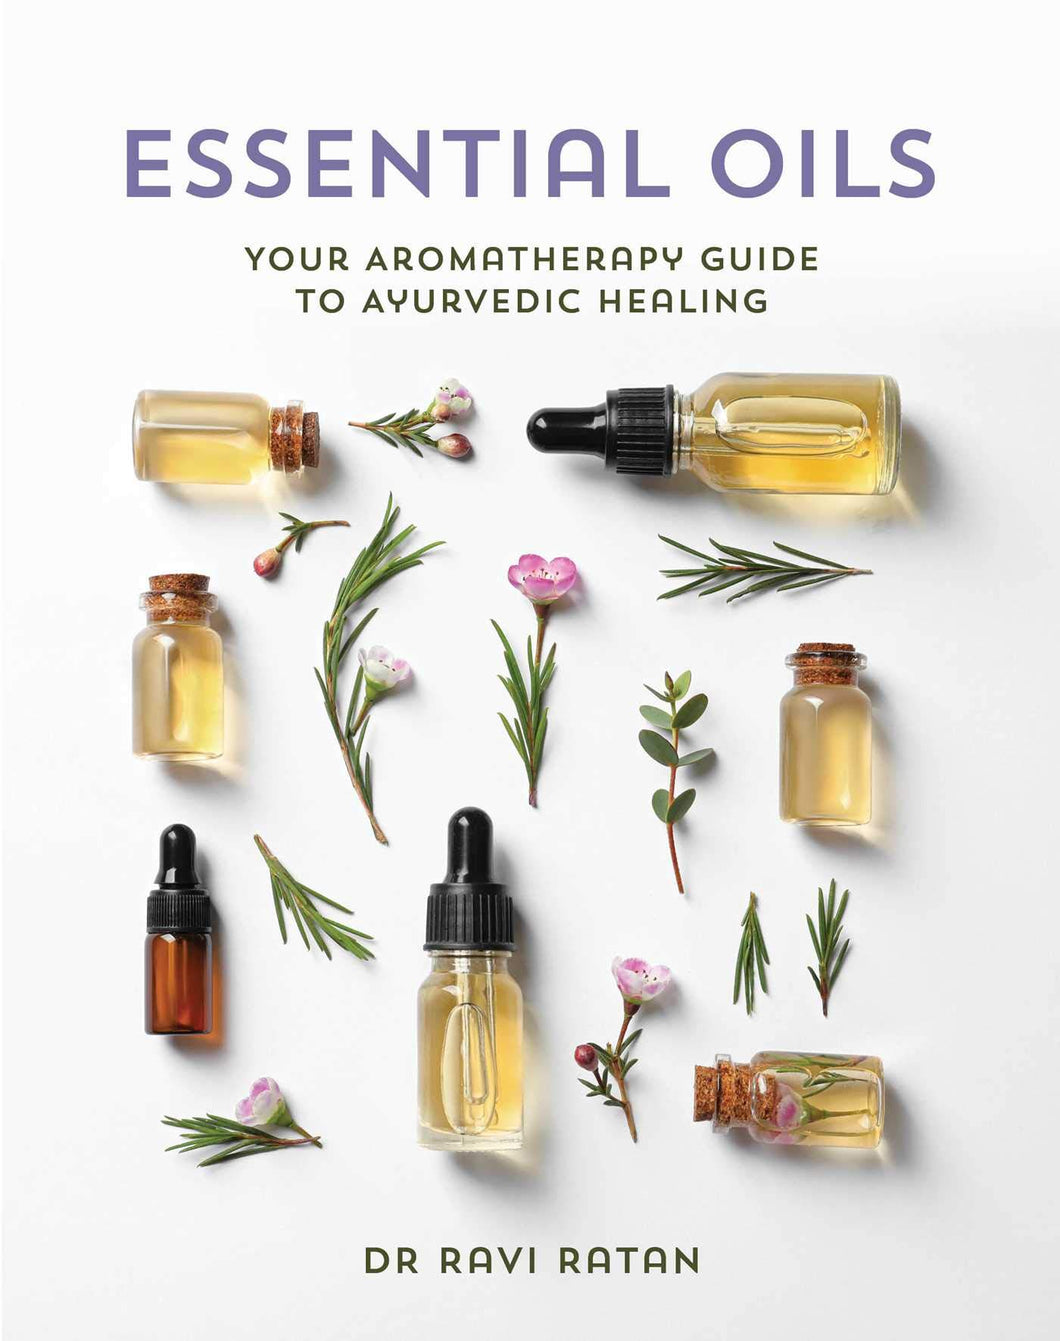 Essential Oils: Your Aromatherapy Guide to Ayurvedic Healing by Dr. Ravi Ratan